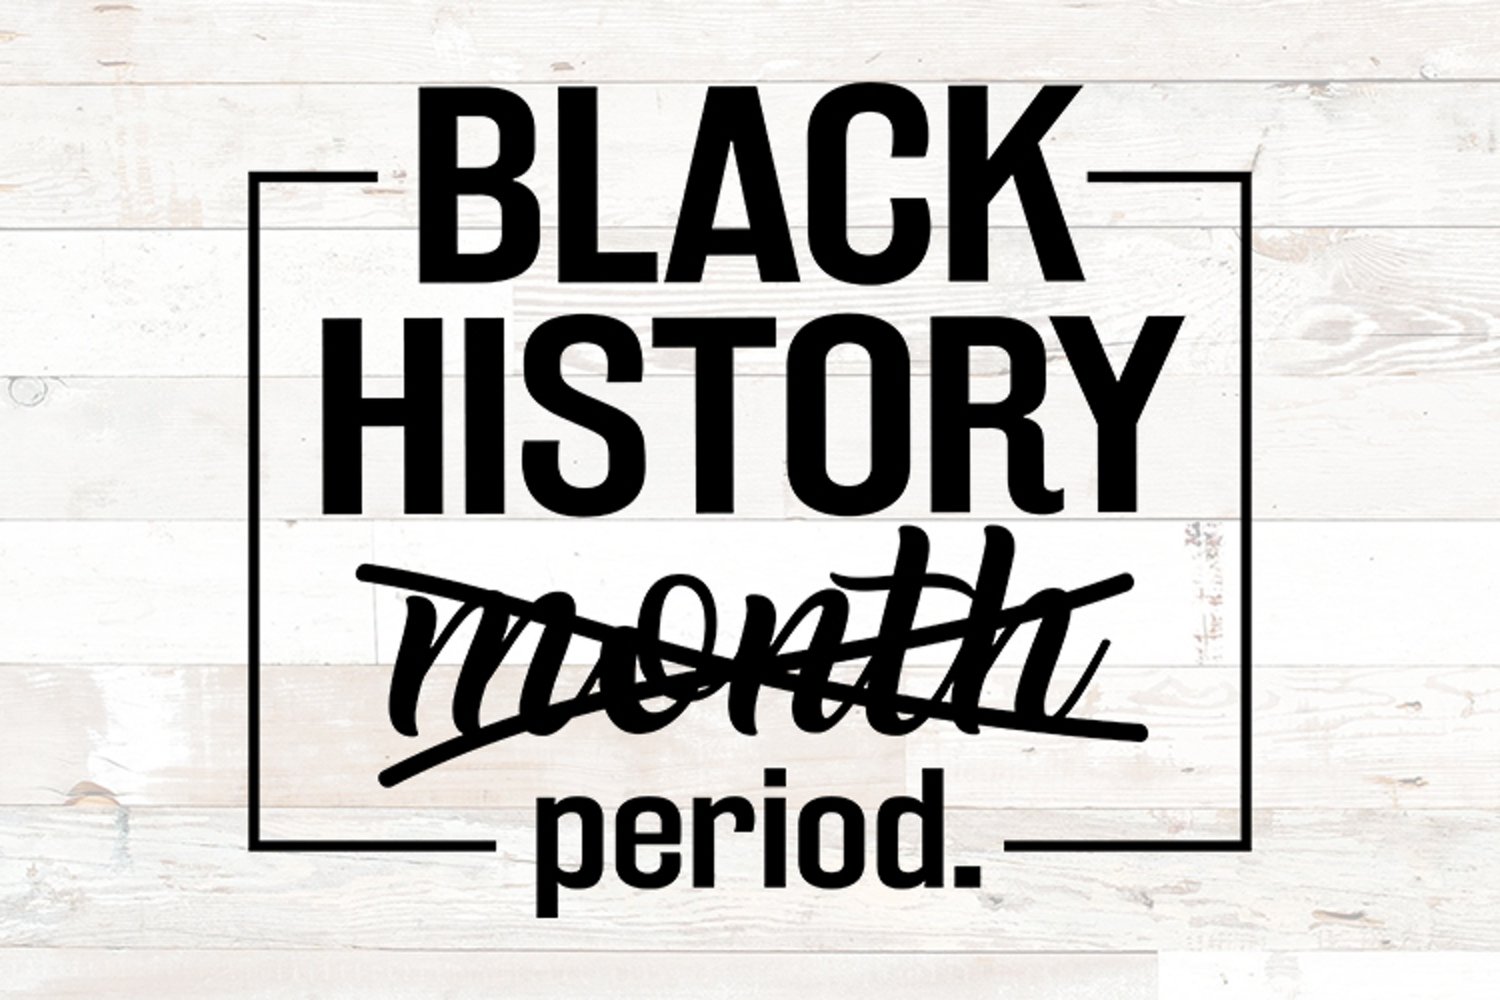 Black History Month Period.